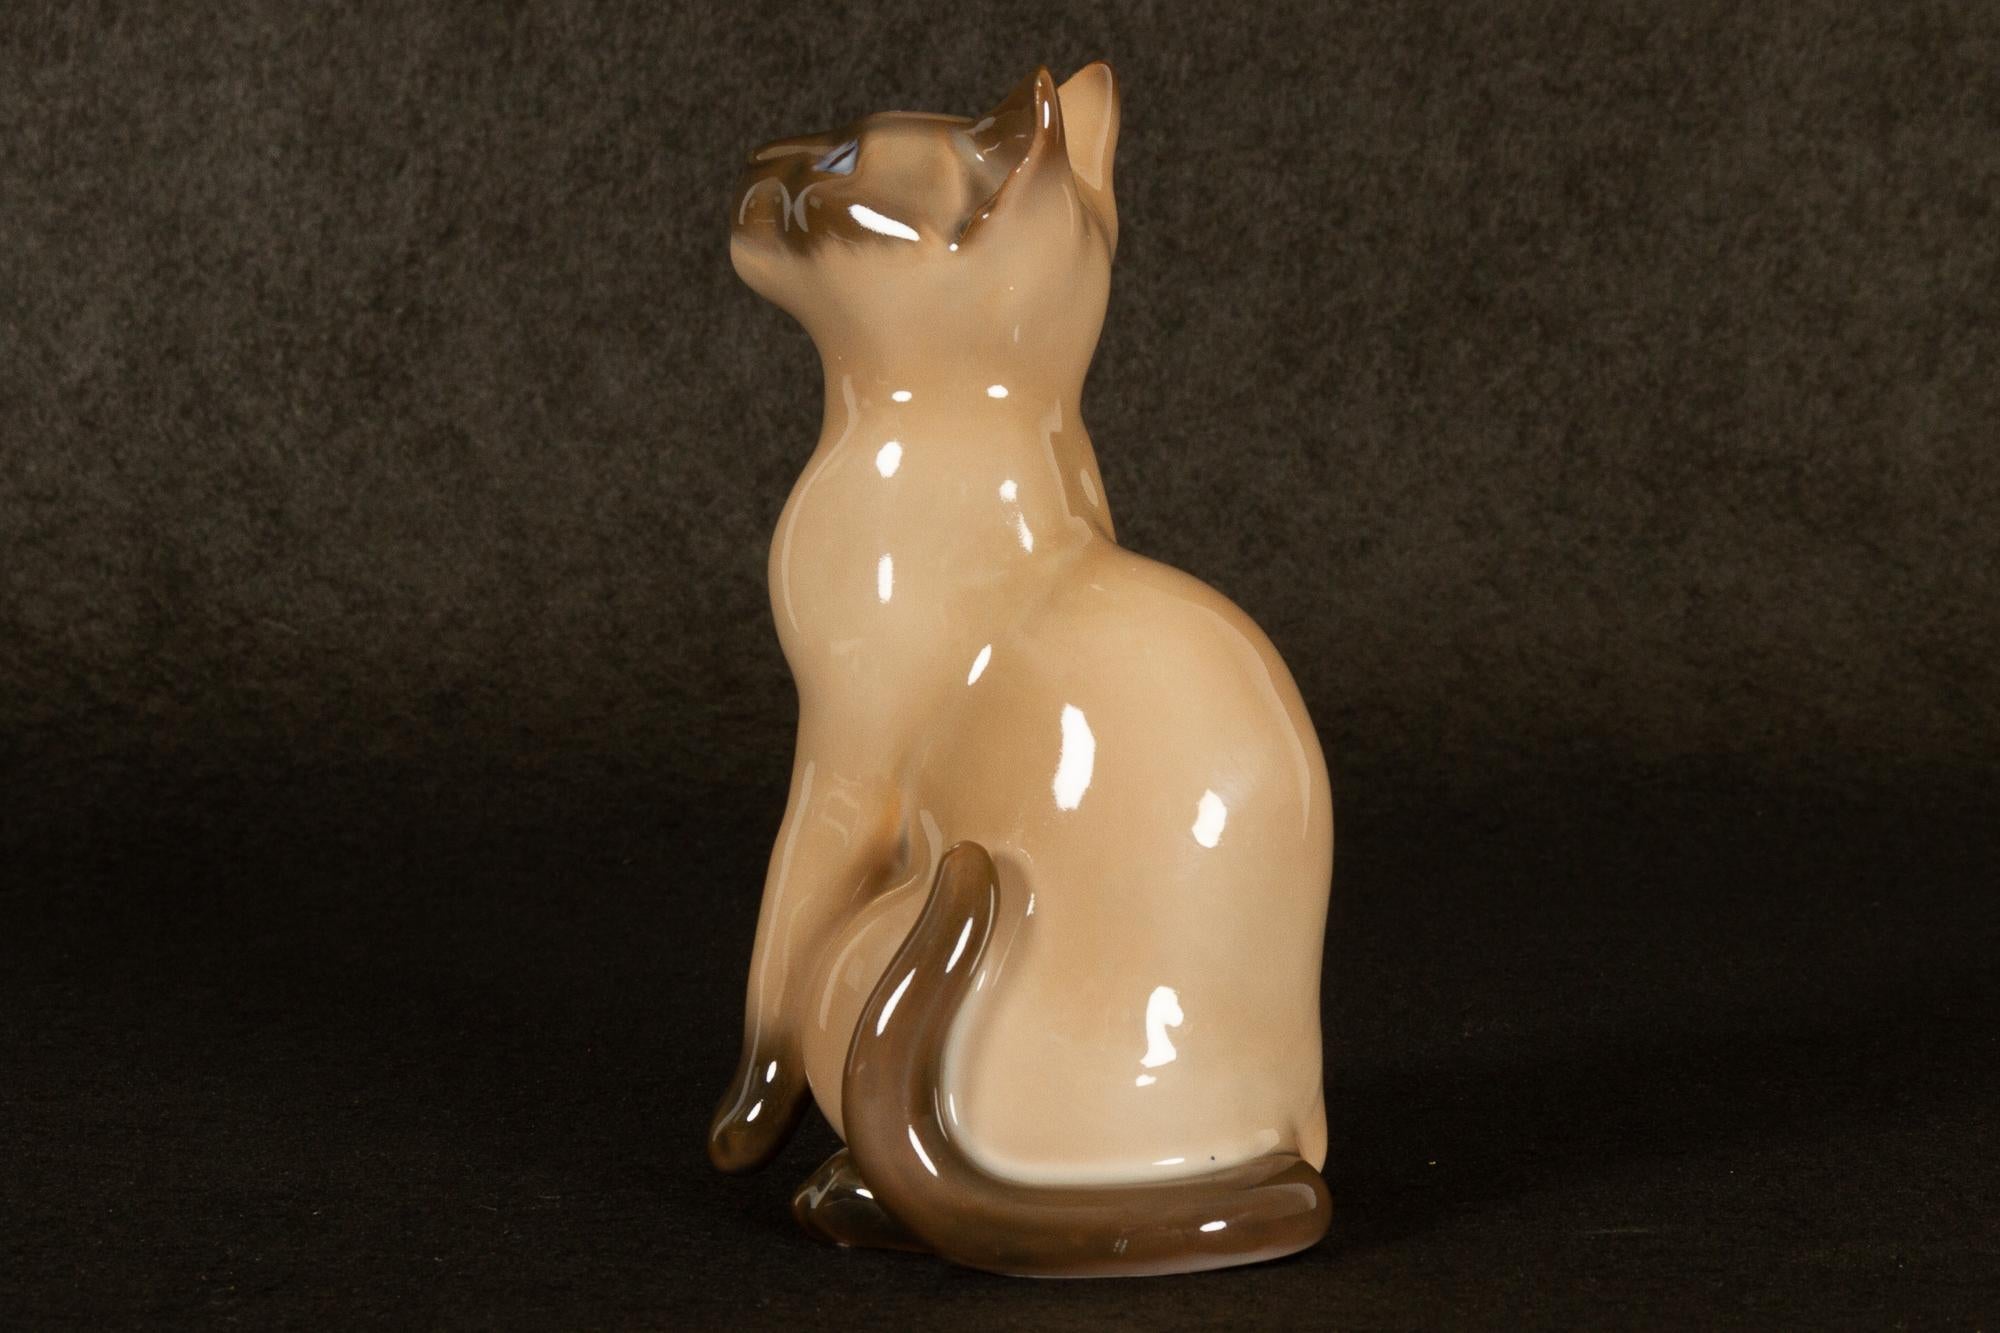 Vintage Danish Porcelain figurine Siamese cat by Bing & Grøndahl.
Porcelain figurine of a Siamese cat designed by artist Svend Jespersen in the 1960s and made by Danish manufacturer Bing & Grøndahl in Copenhagen in the 1970s.
Very good condition.